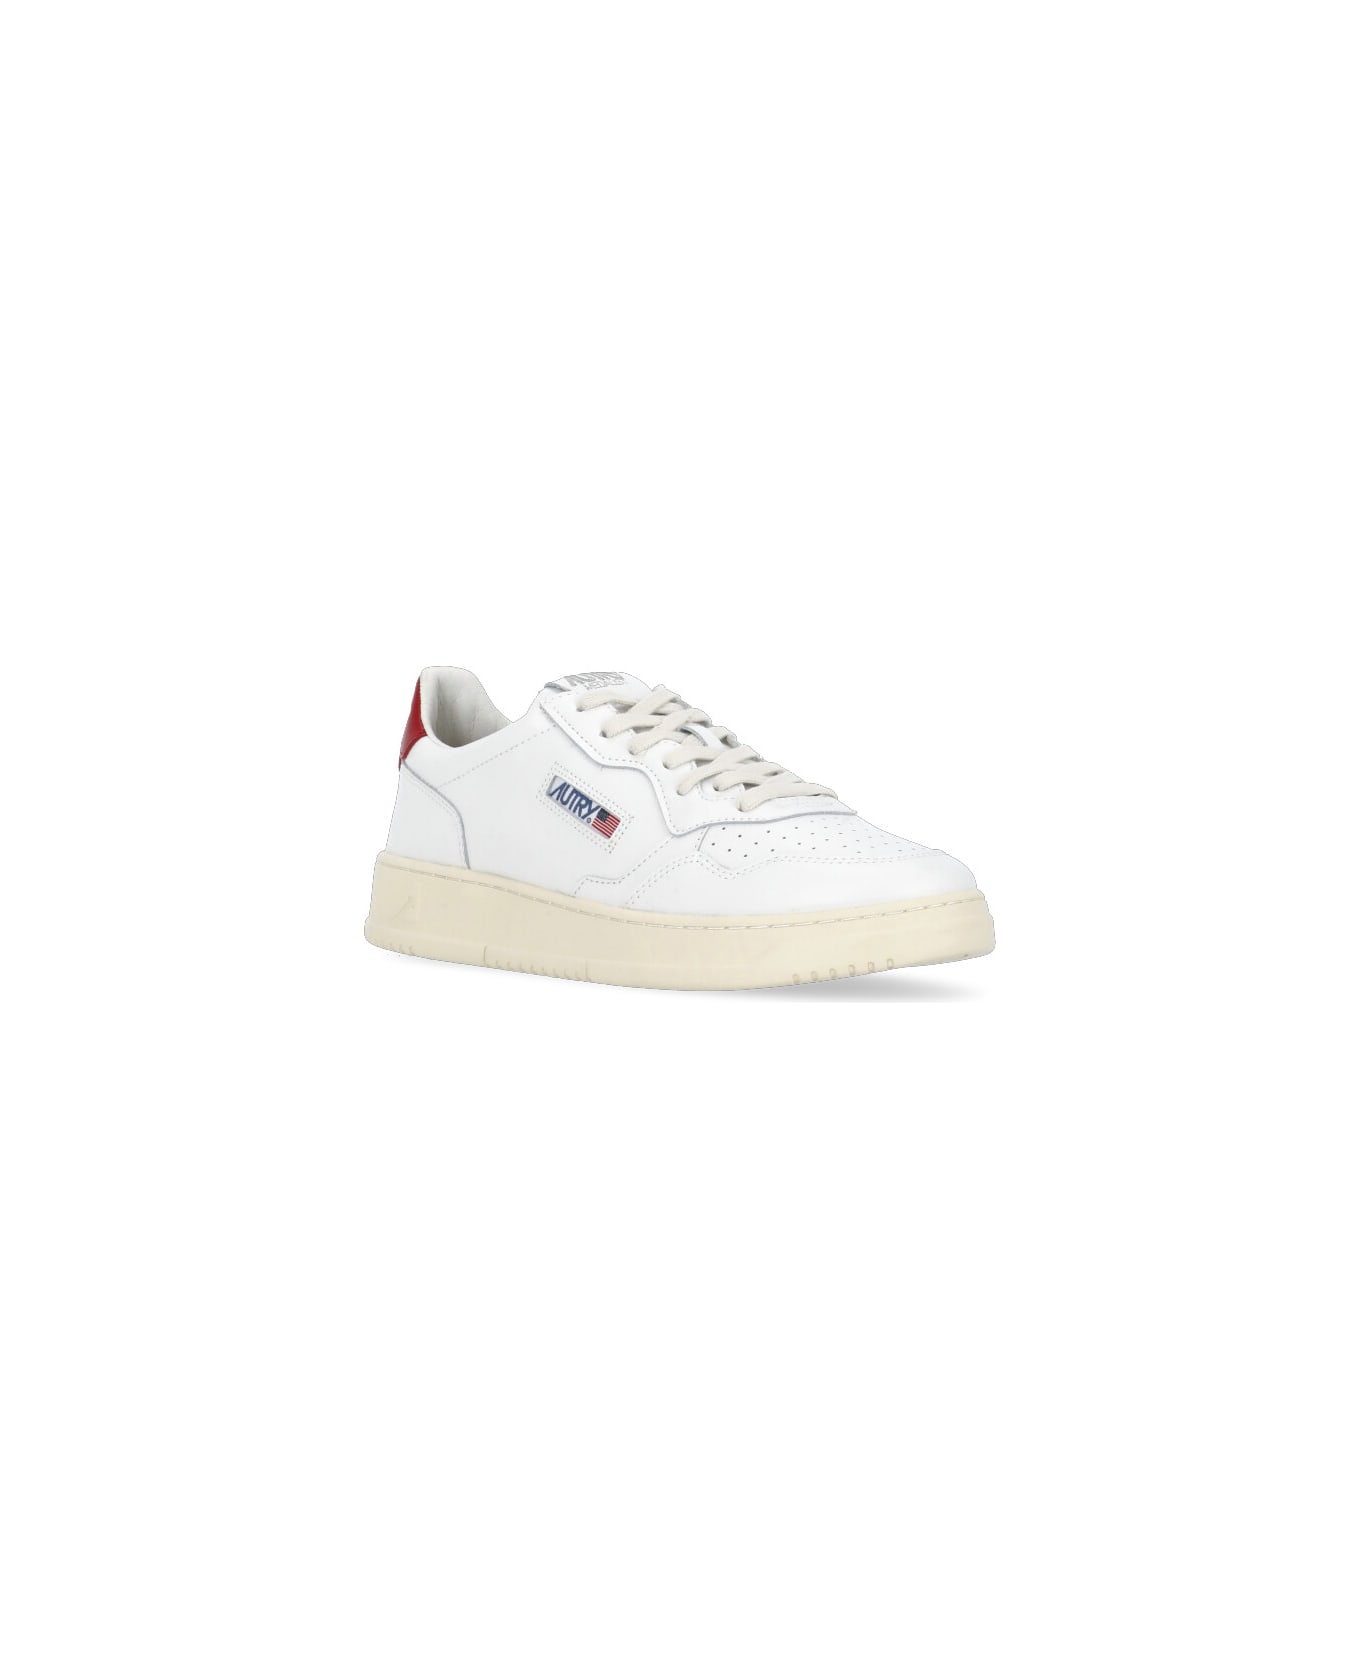 Autry Aulm Ll21 Sneakers - White